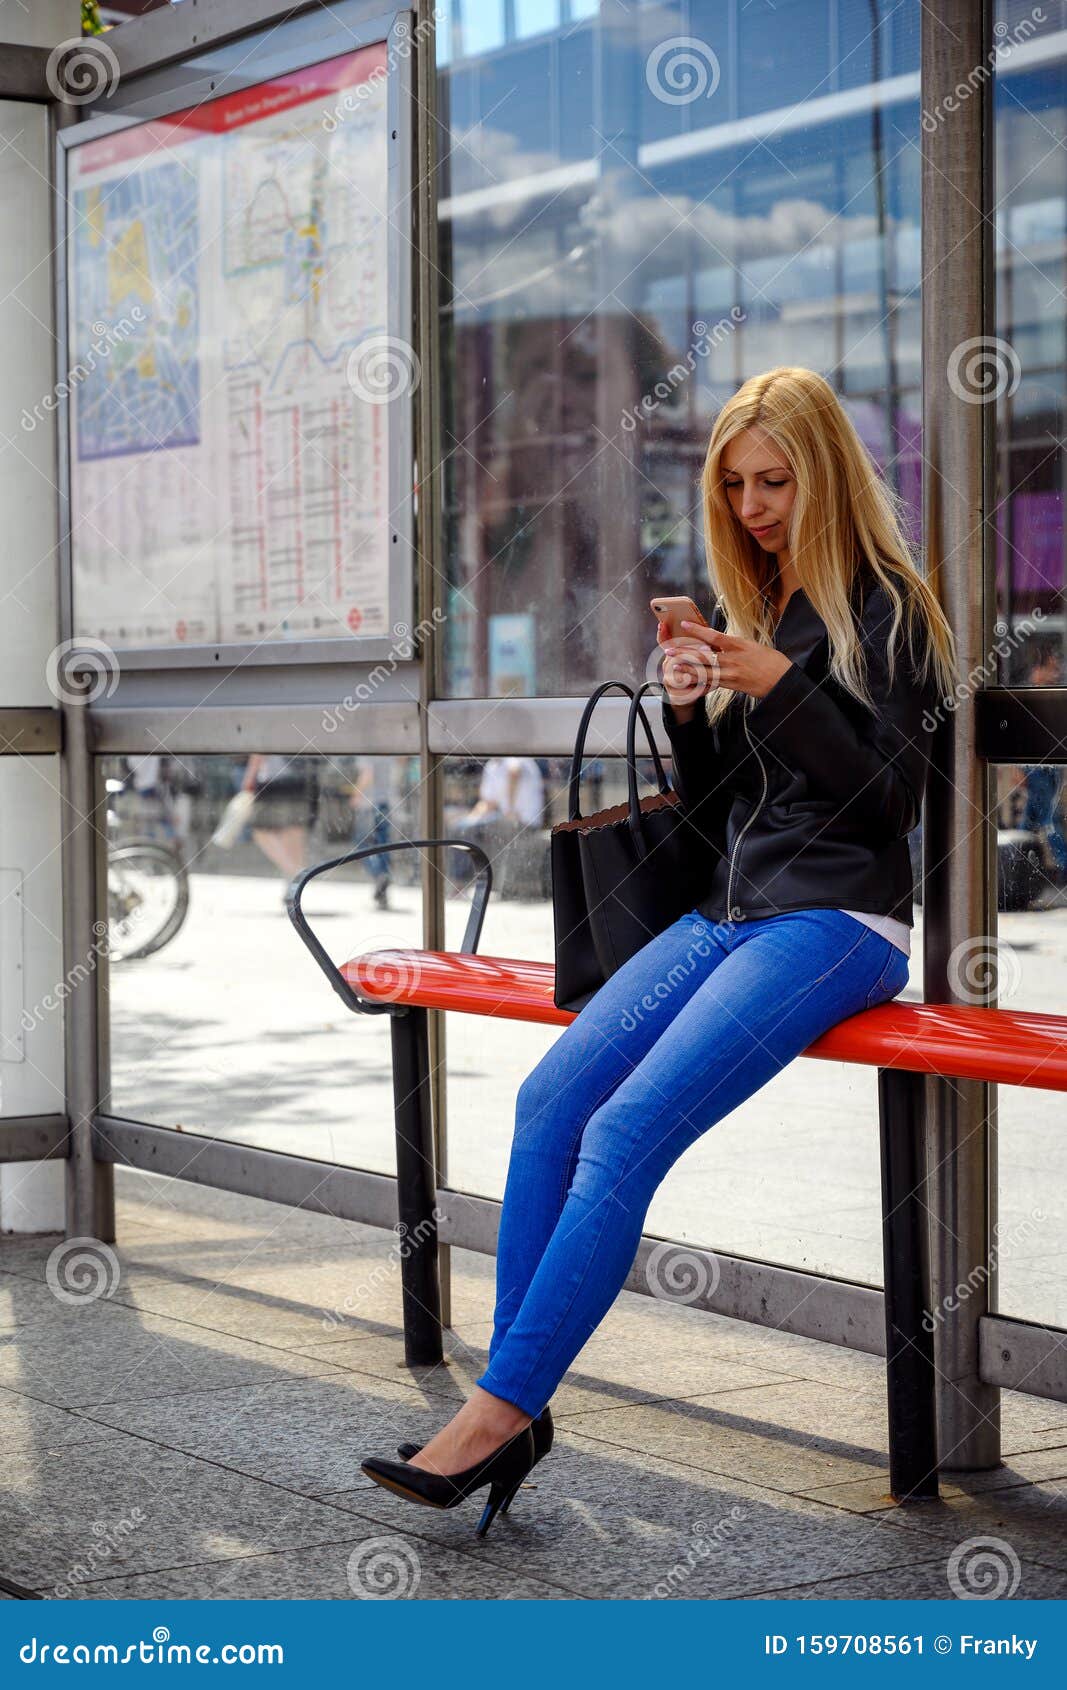 An Attractive Young Woman Waiting For The Bus At The Bus Stop Stock